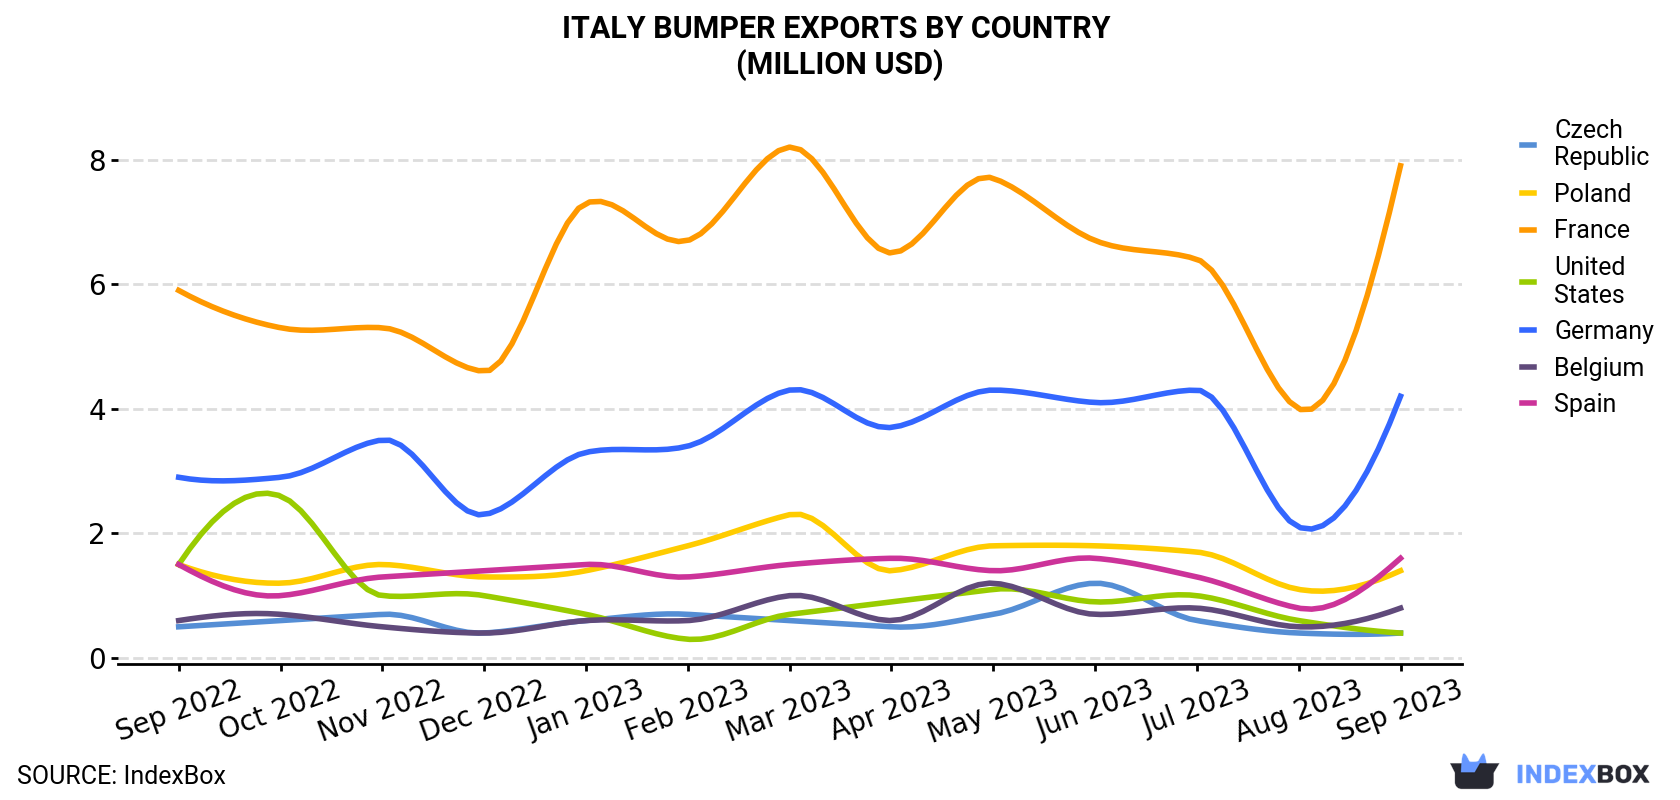 Italy Bumper Exports By Country (Million USD)